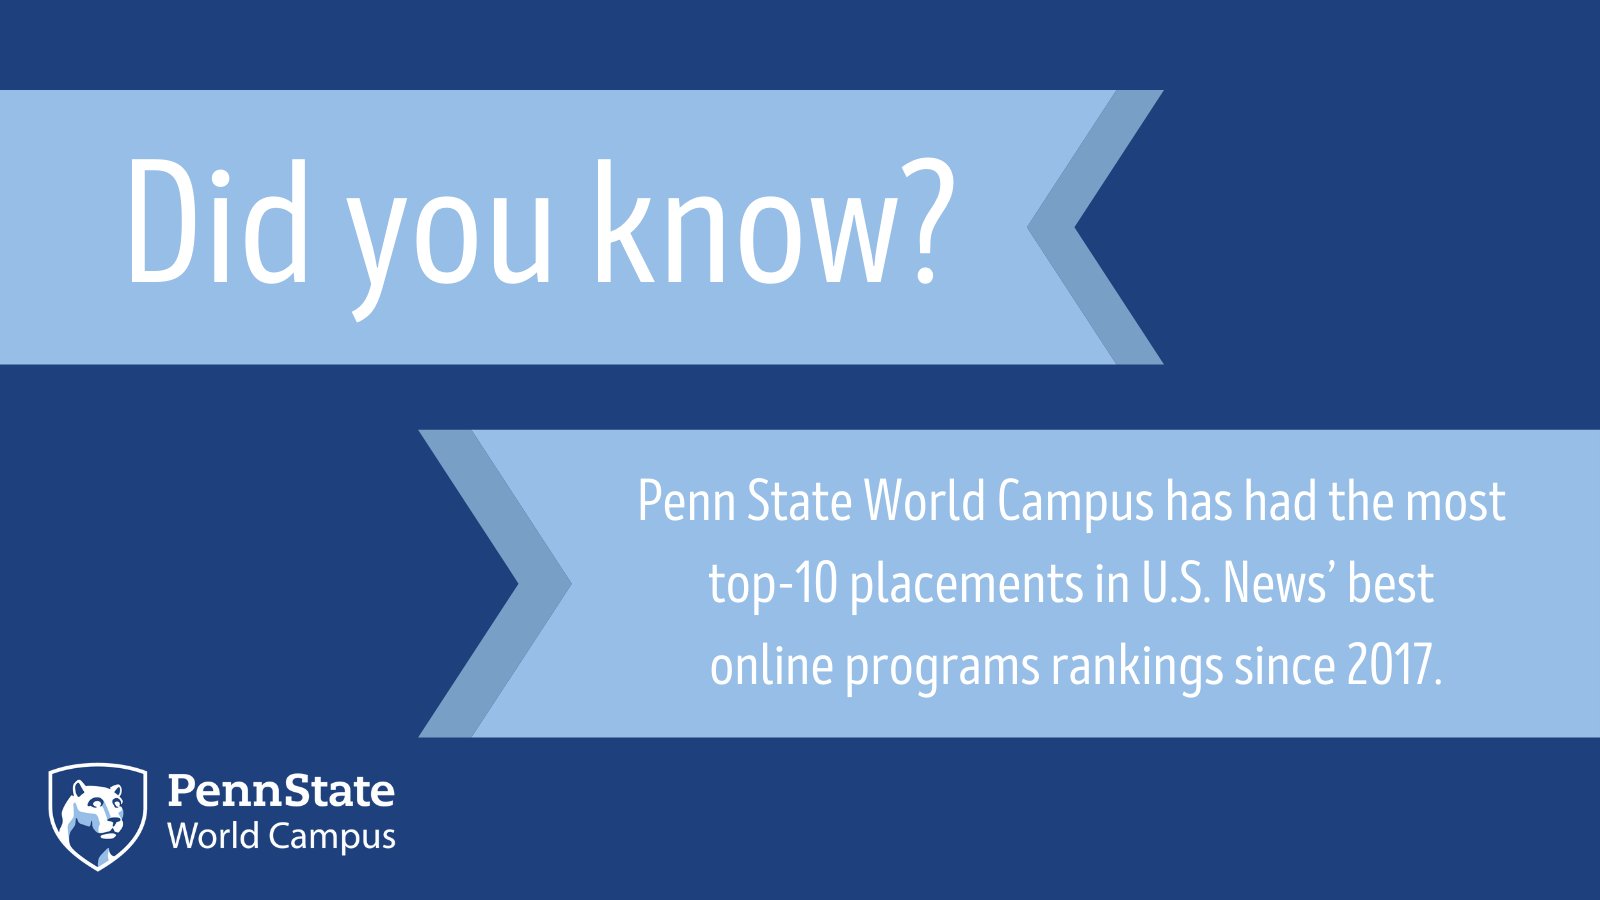 About Us - Penn State World Campus